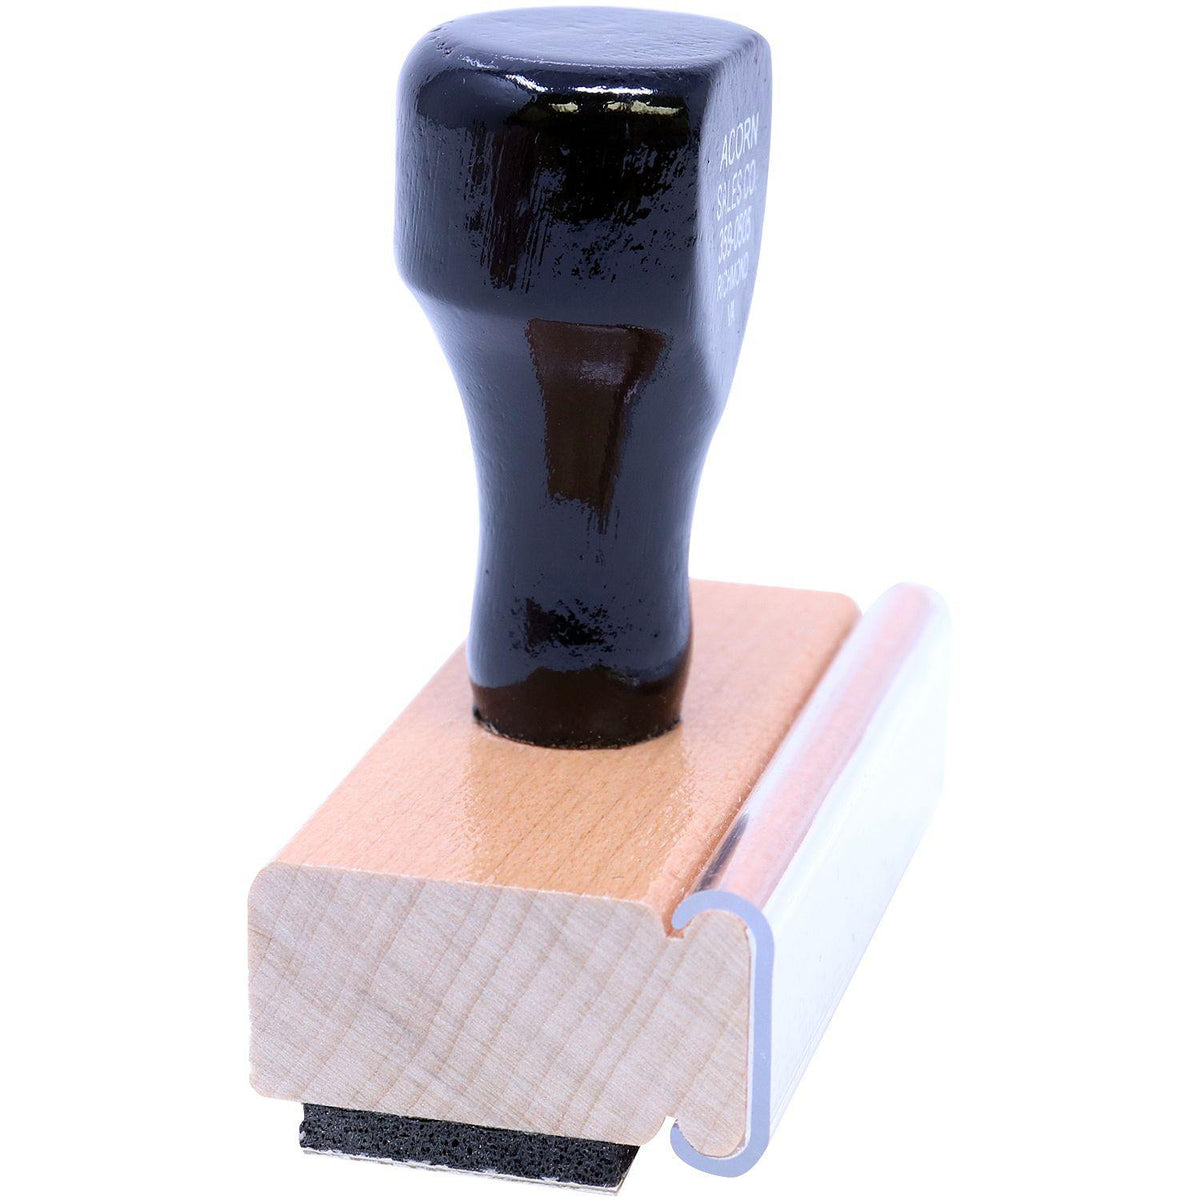 Side View of Large Office Copy Rubber Stamp at an Angle